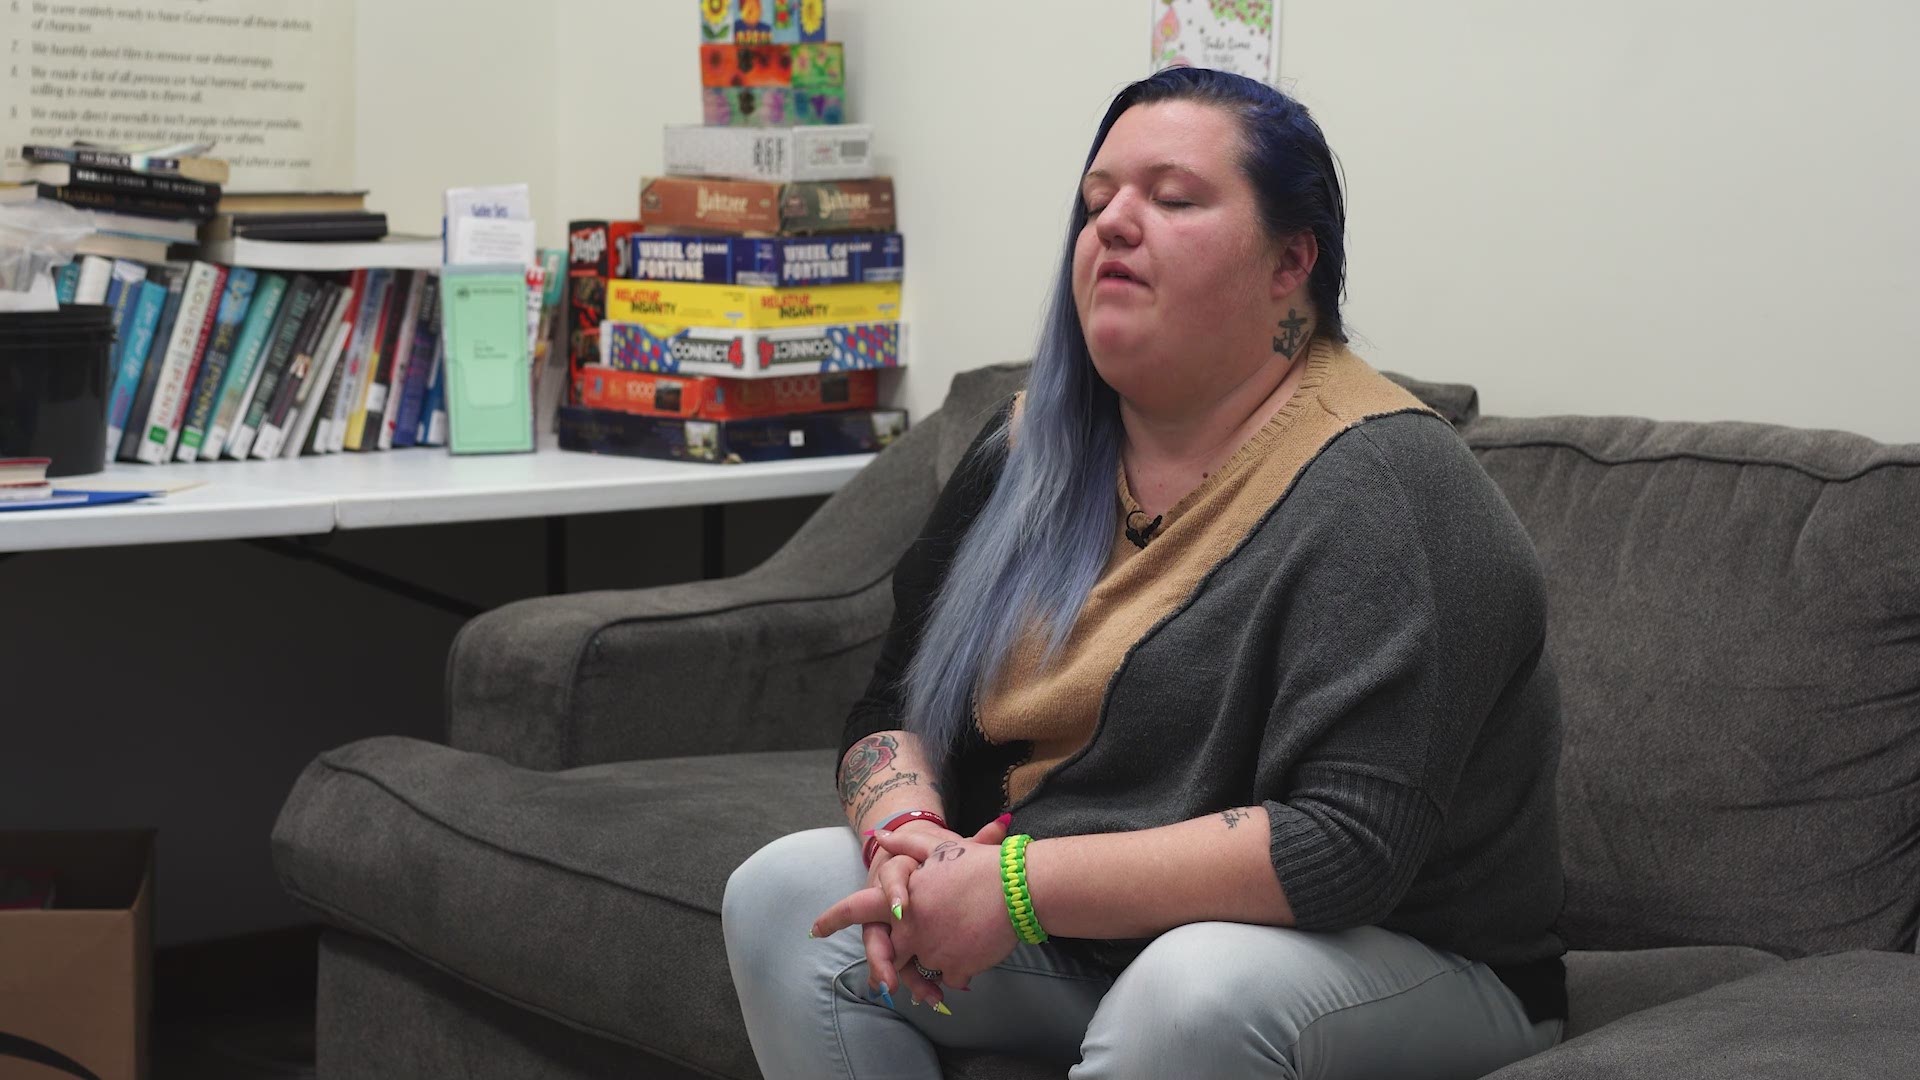 Courtney Shaff is in recovery and shared her story with WUSA9 on her eleventh day at Awakenings Recovery Center in Hagerstown, Md.